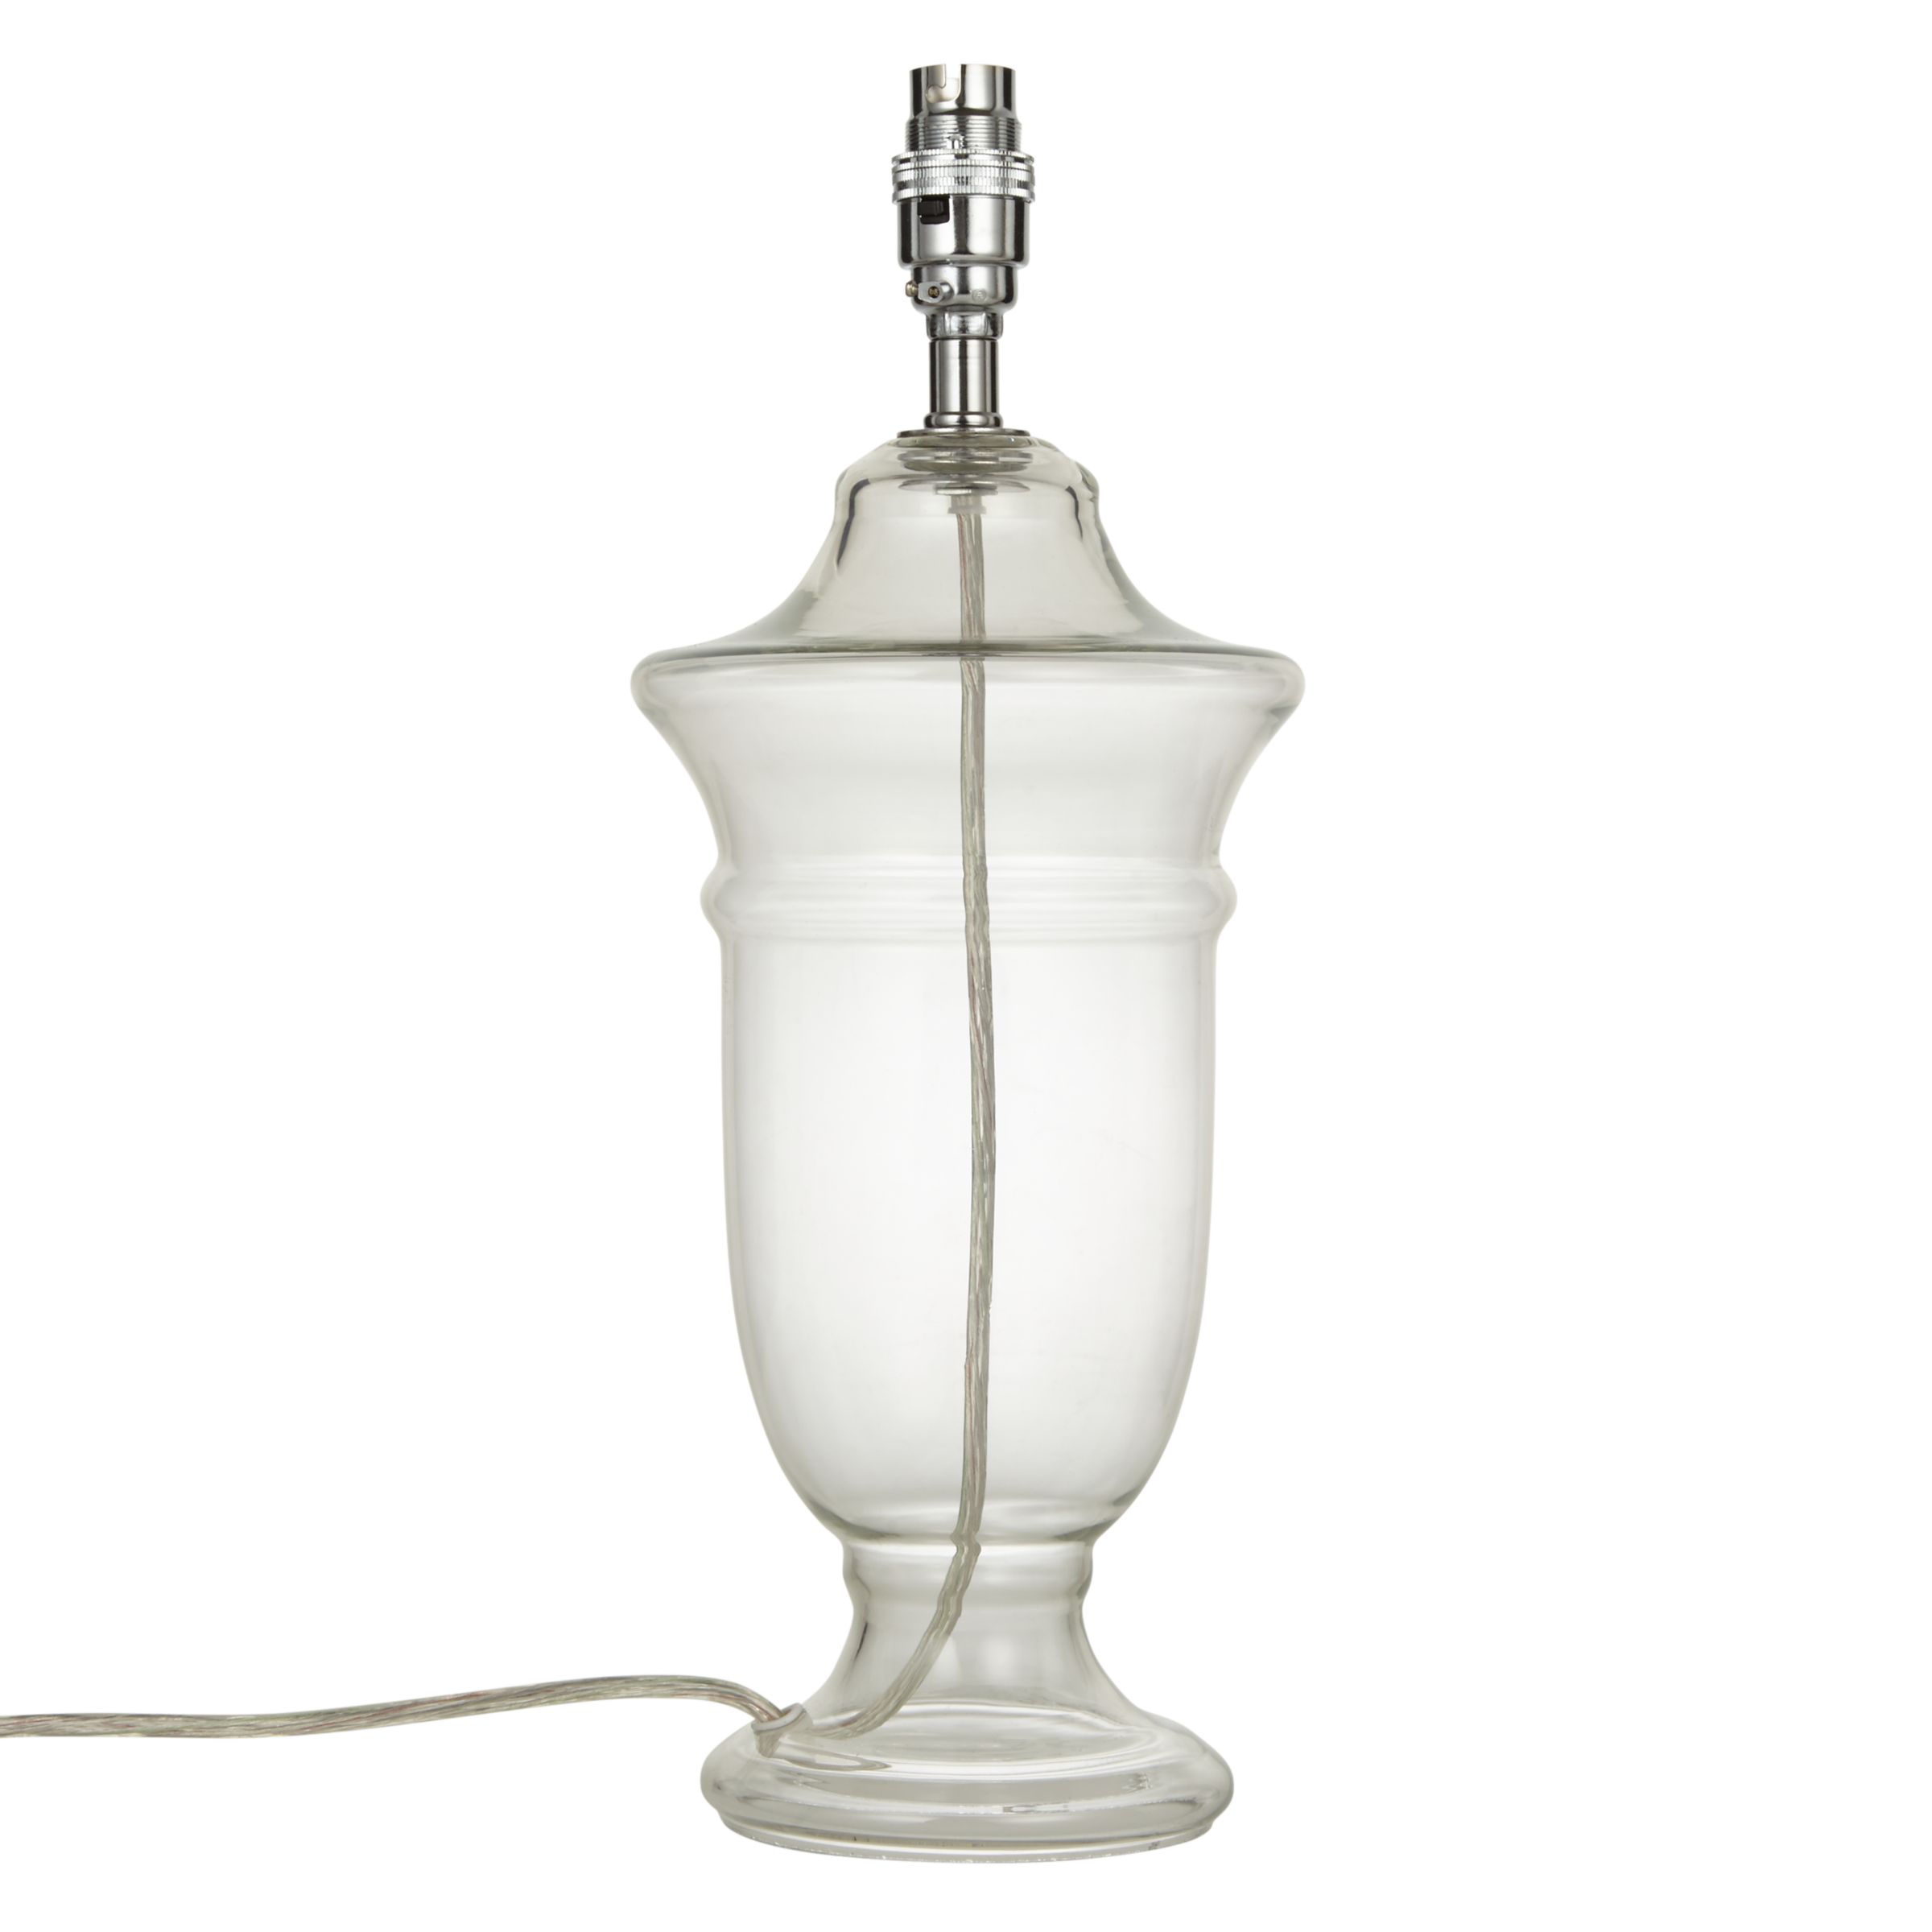 John Lewis & Partners Beatrice Glass Urn Lamp Base, Clear